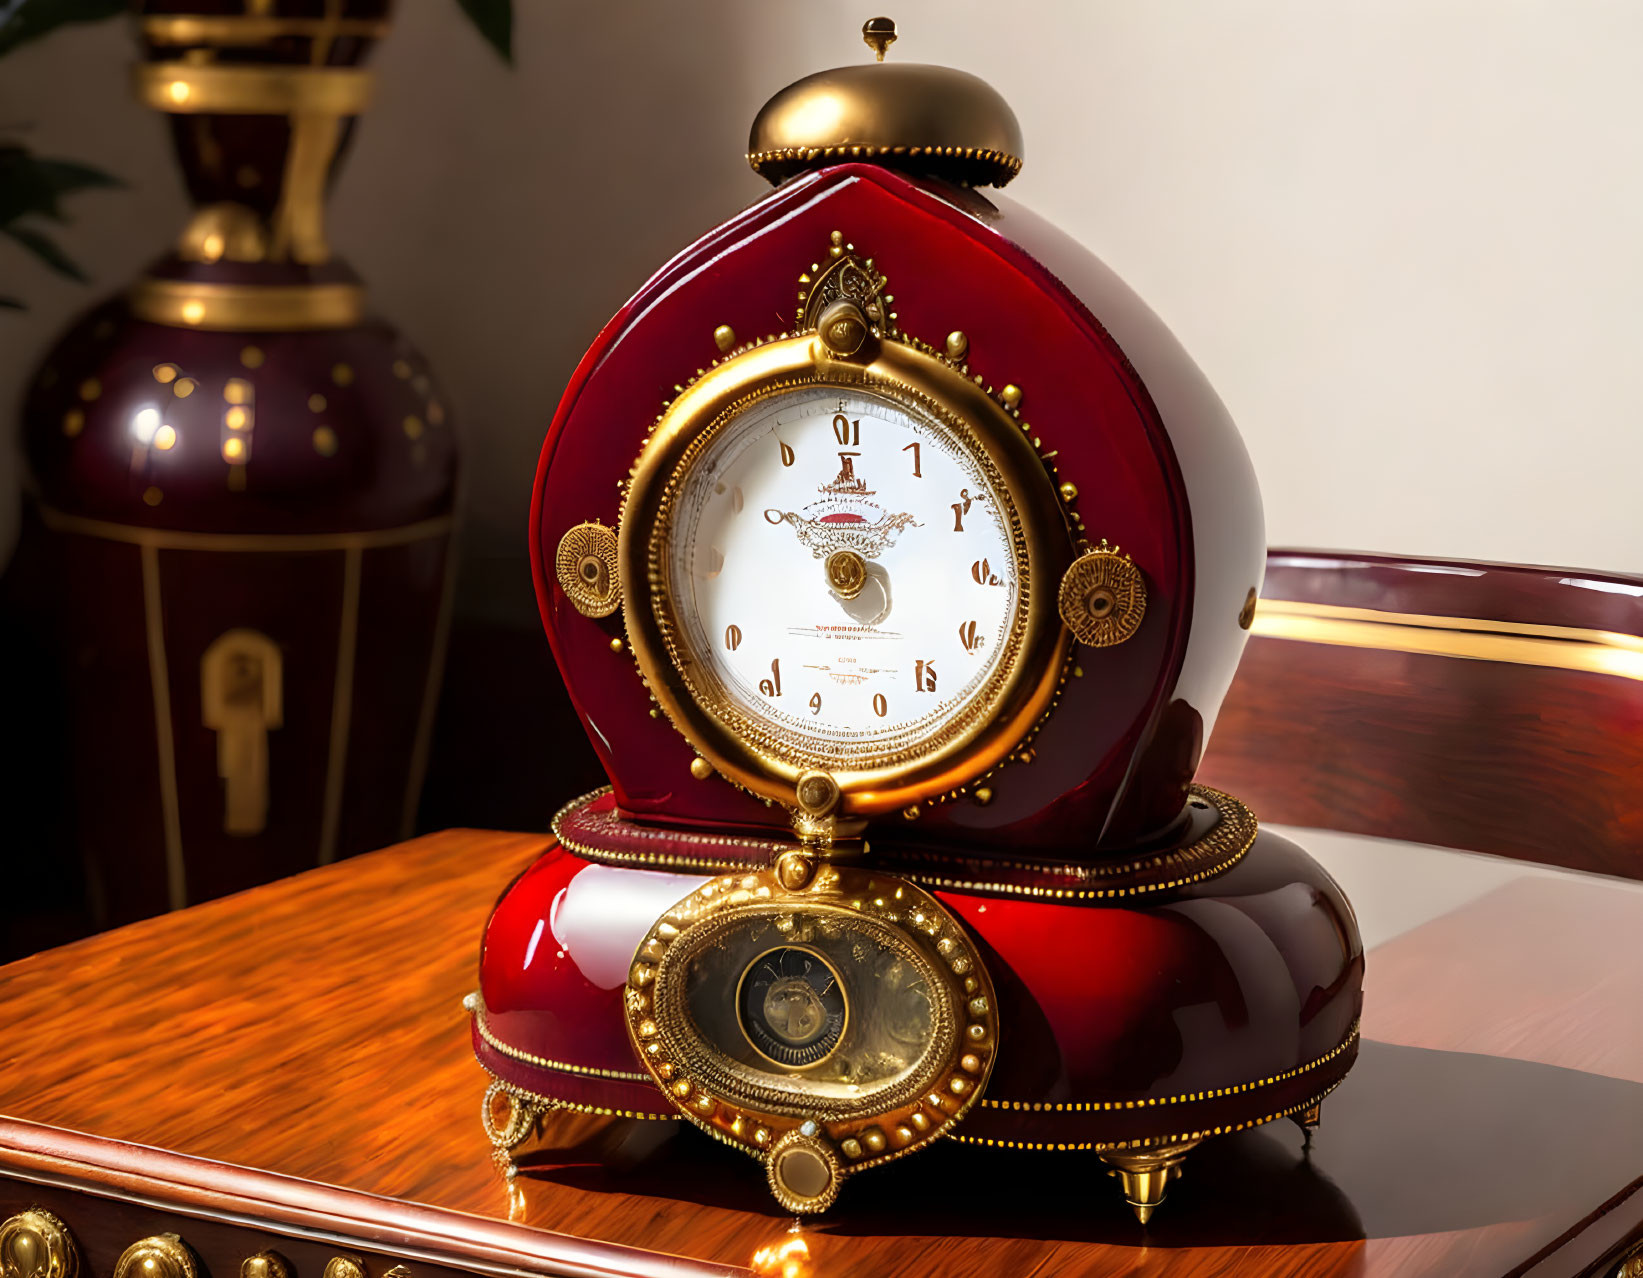 Red and Gold Mantel Clock with Roman Numerals on Polished Wood Surface